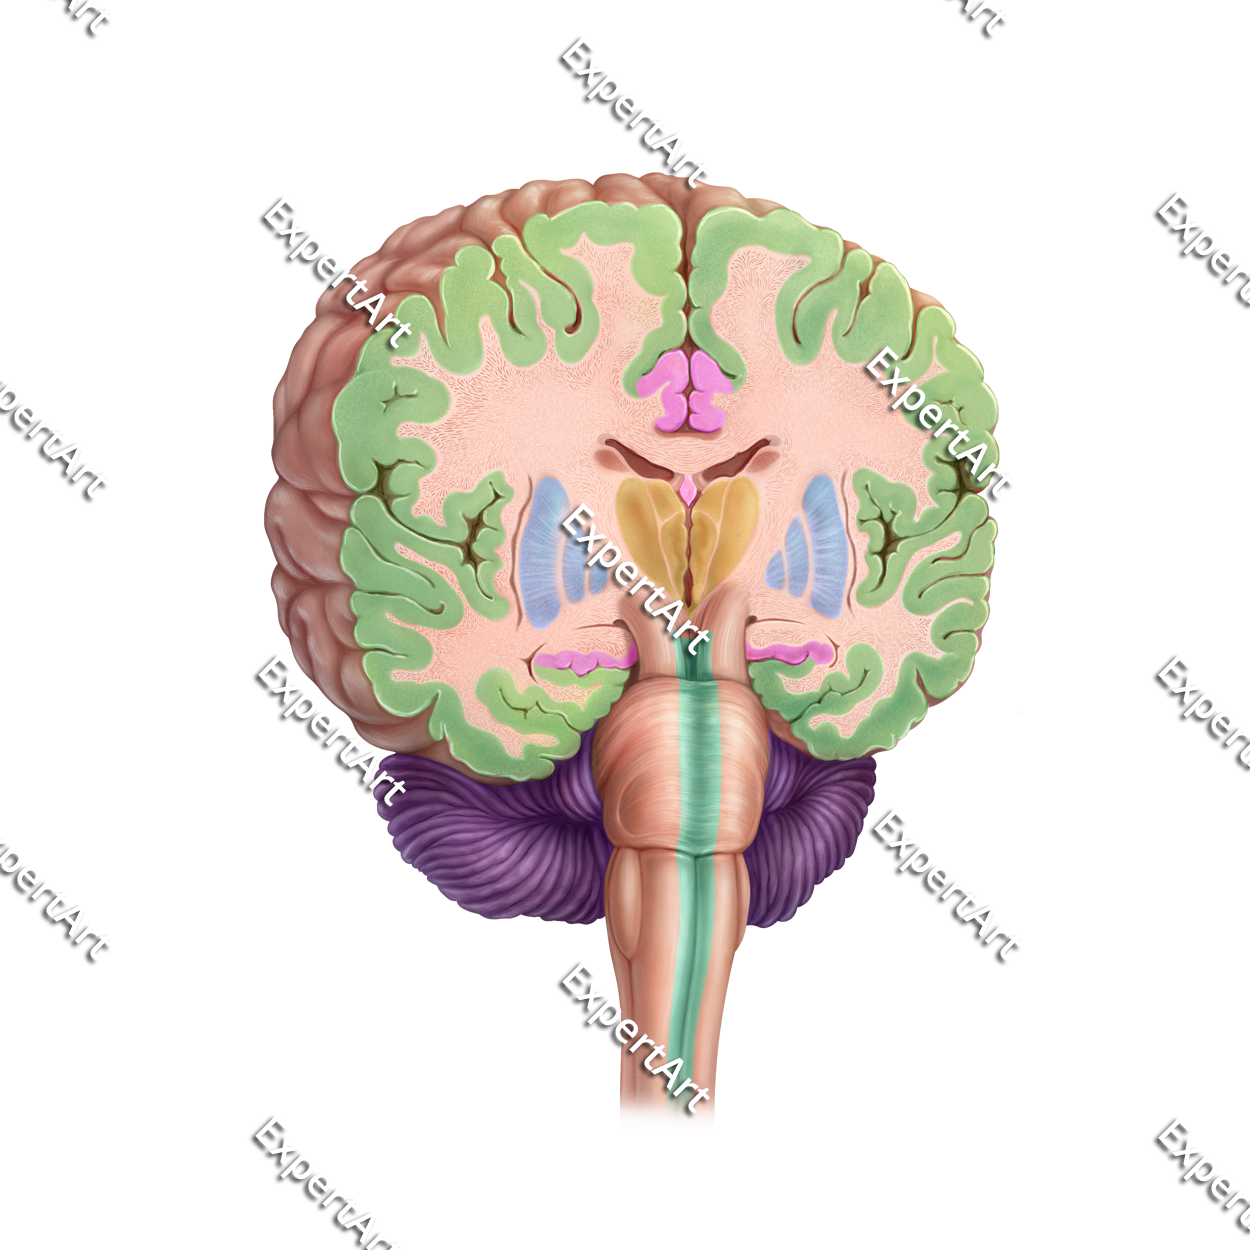 Brain coronal view with highlights